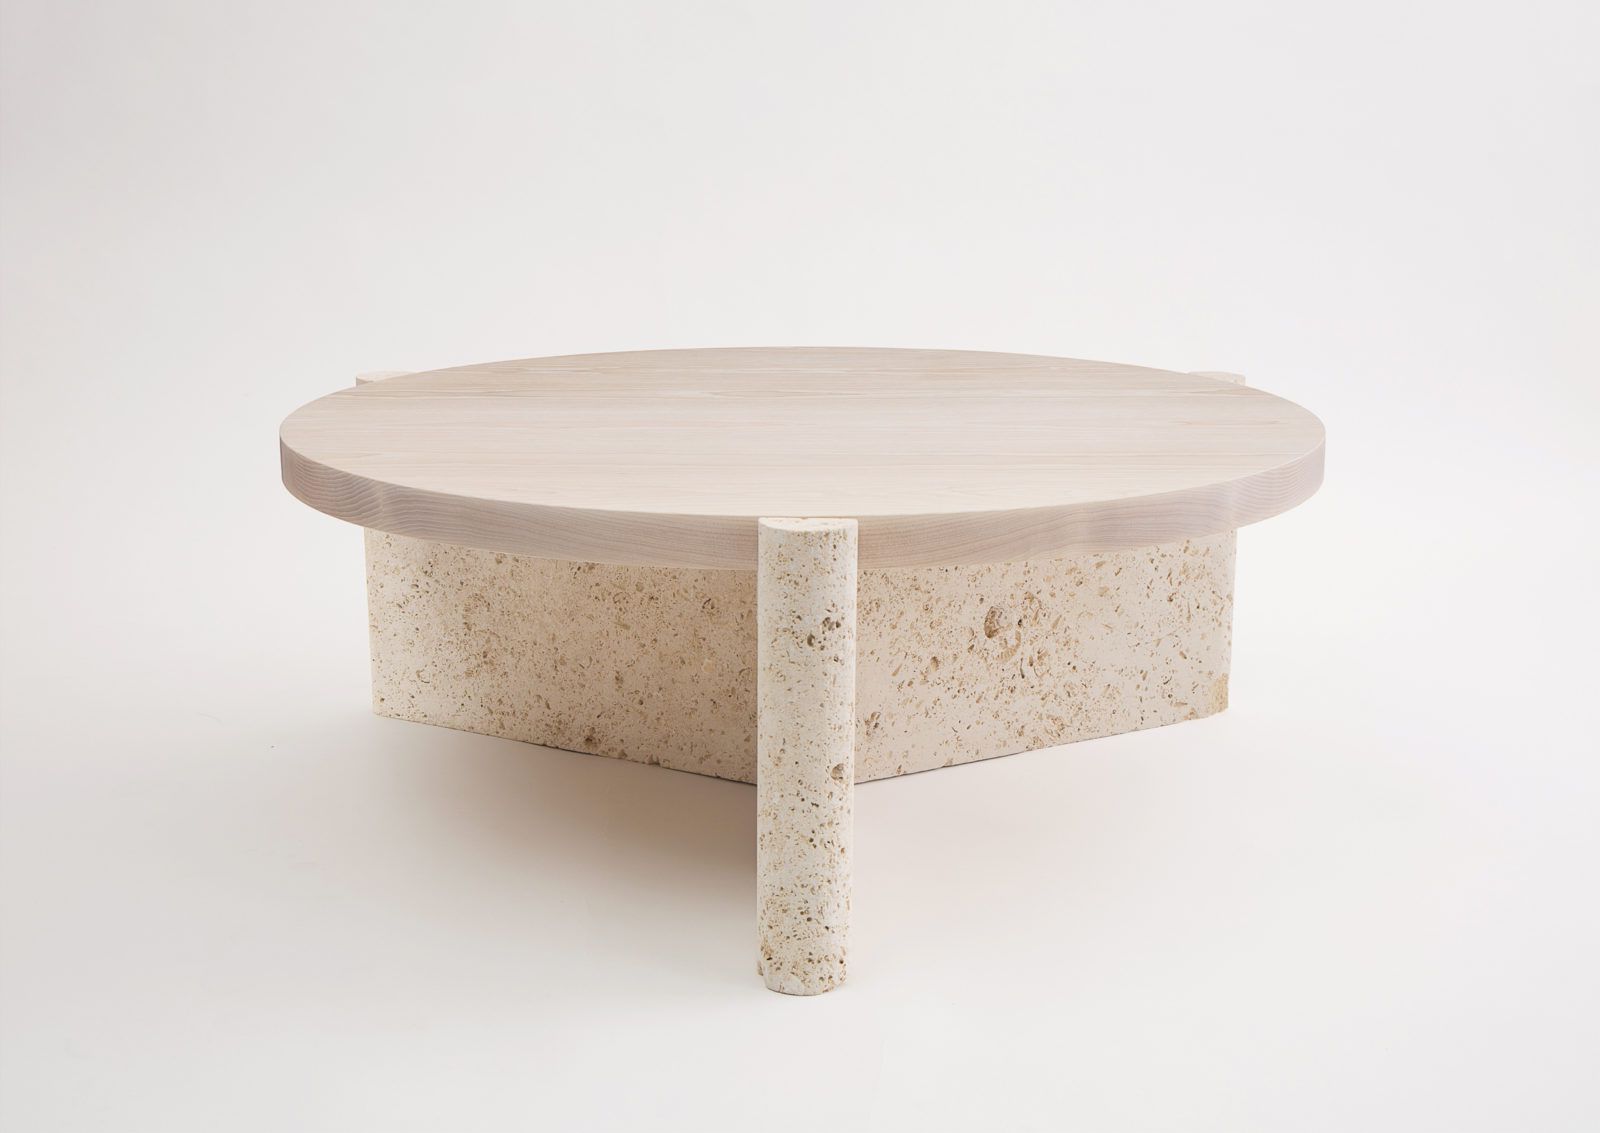 [%[27+] Monaco Round Concrete Coffee Table Within Most Up To Date Monaco Round Coffee Tables|monaco Round Coffee Tables Intended For Current [27+] Monaco Round Concrete Coffee Table|well Known Monaco Round Coffee Tables With [27+] Monaco Round Concrete Coffee Table|well Known [27+] Monaco Round Concrete Coffee Table Pertaining To Monaco Round Coffee Tables%] (View 5 of 15)